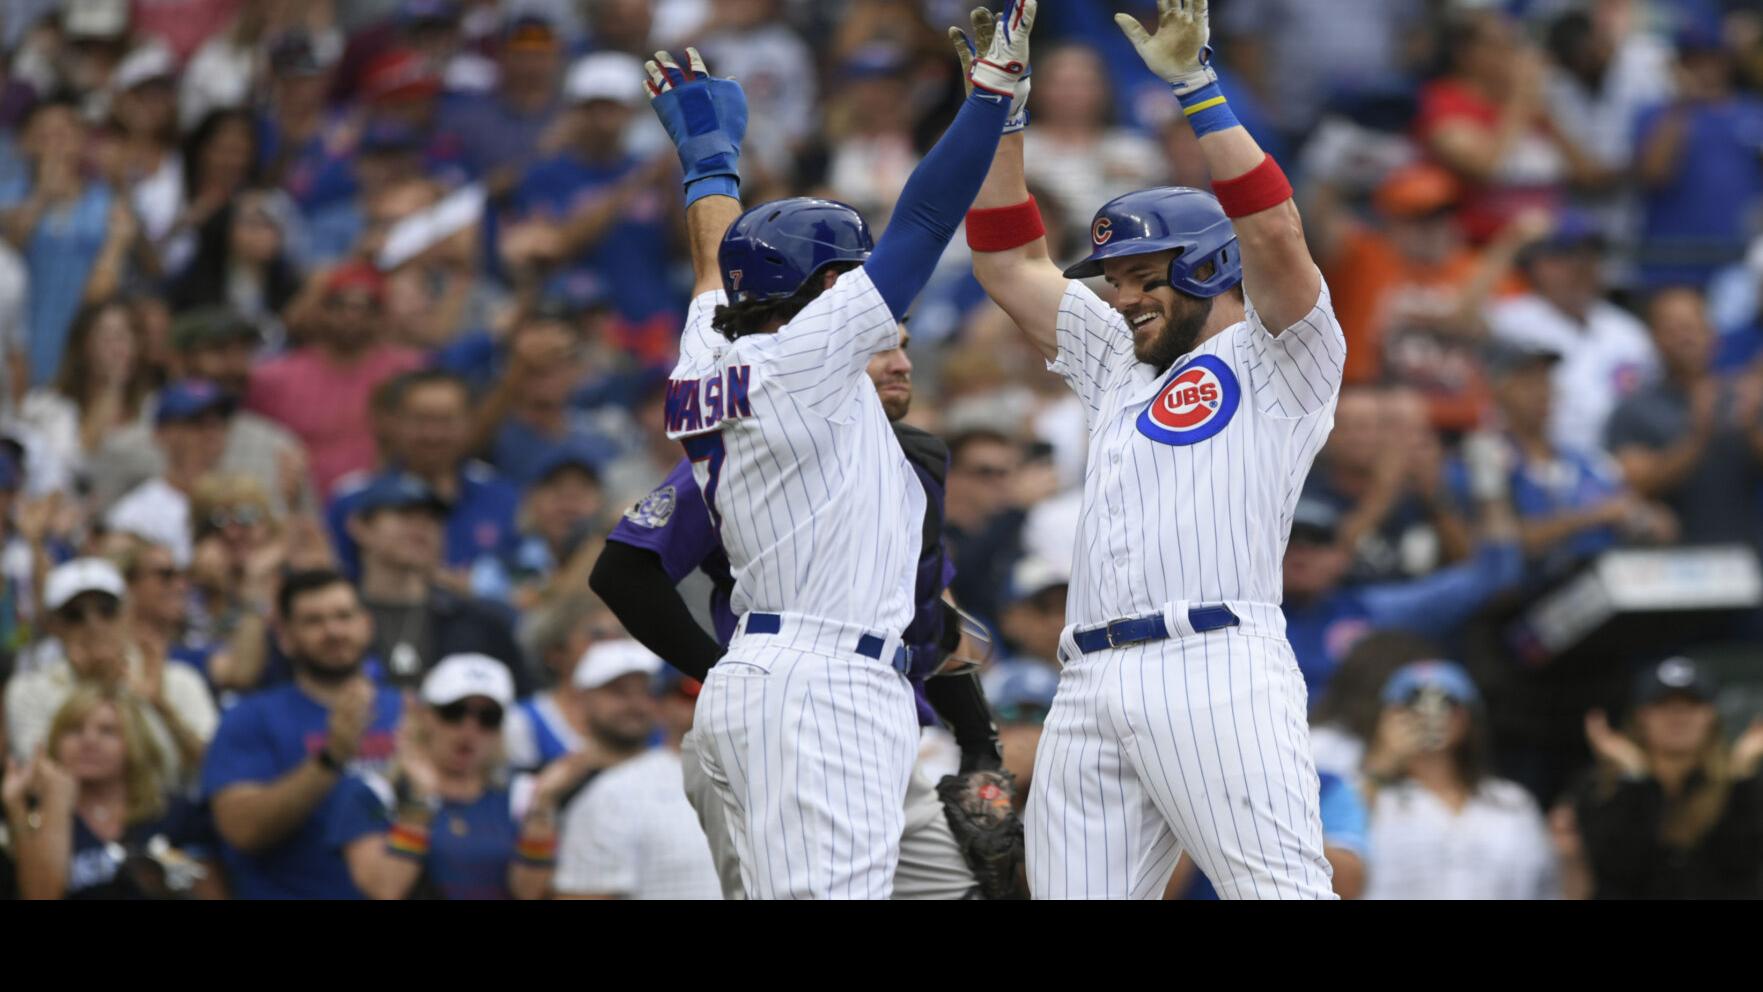 MLB roundup: Cubs earn walk-off win over White Sox